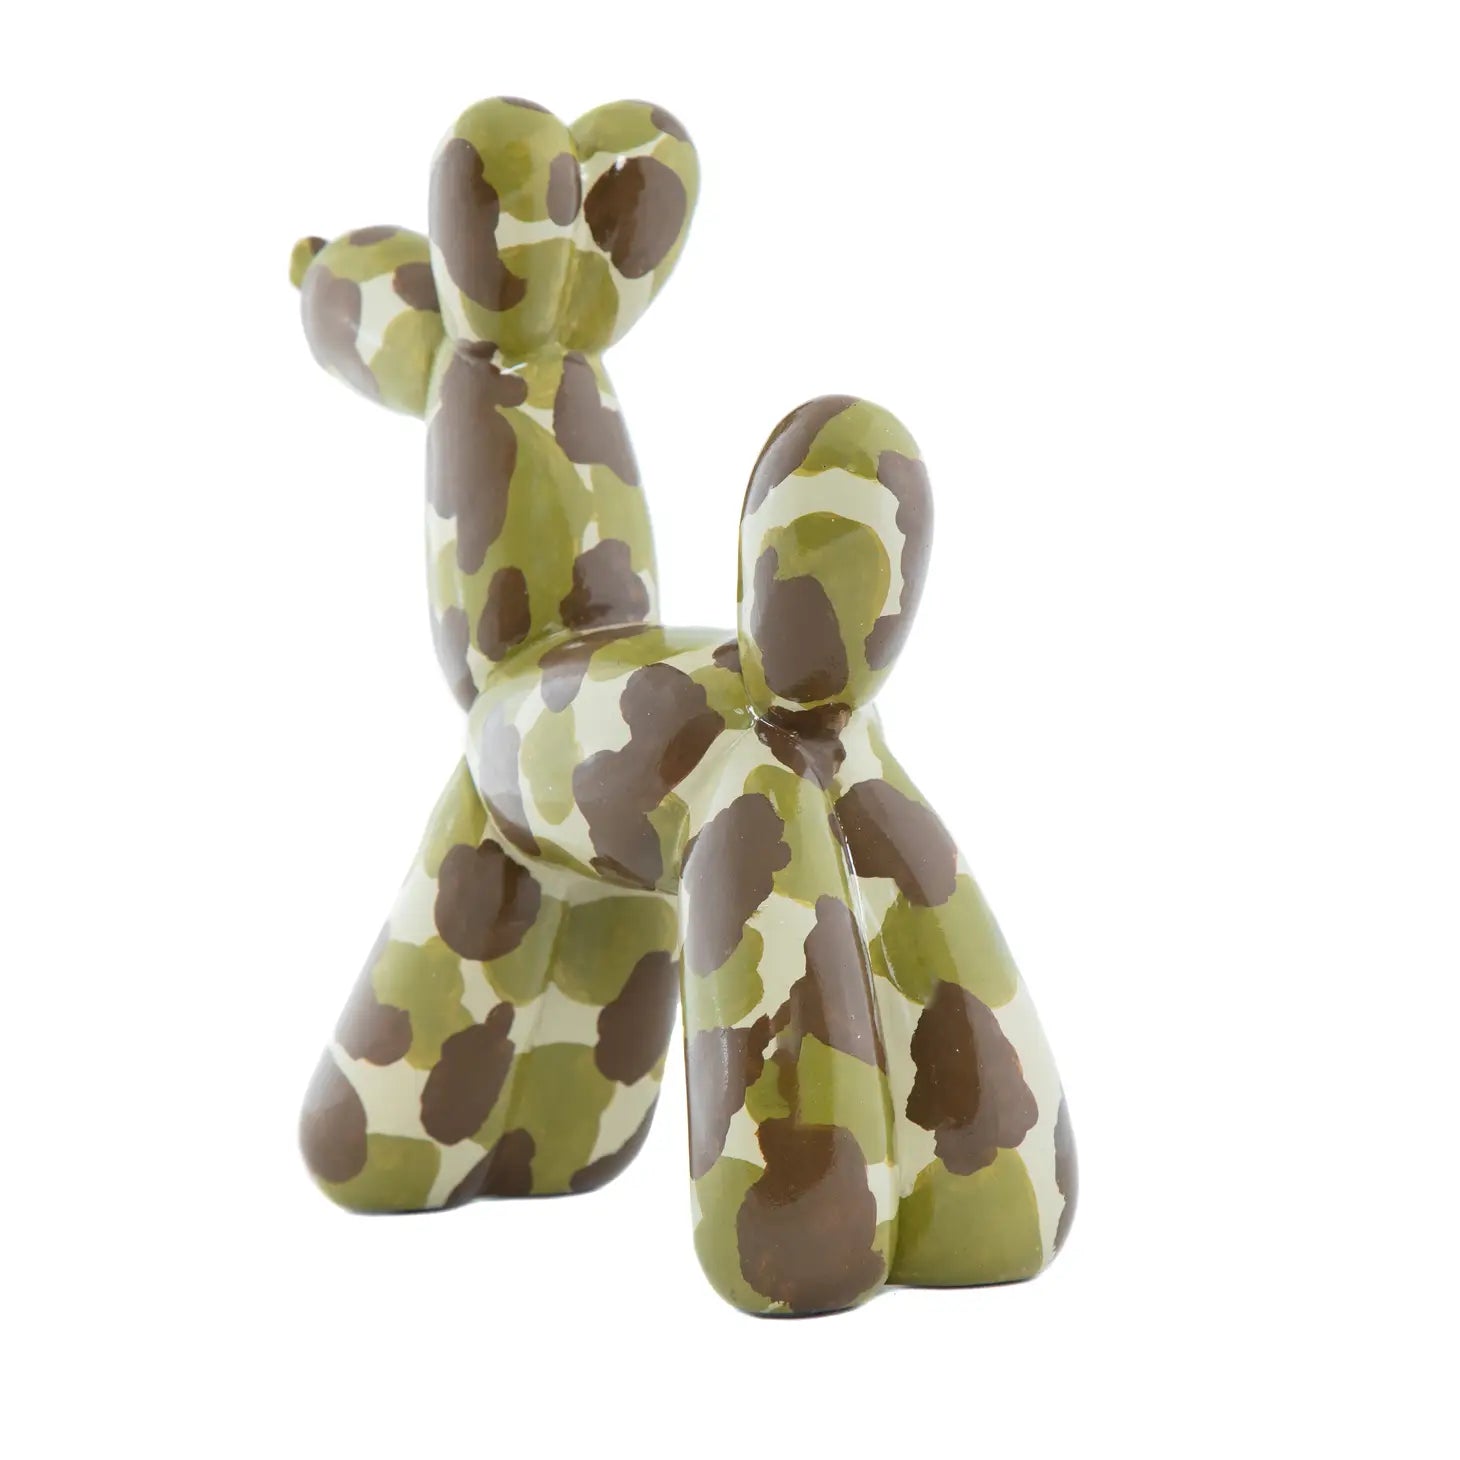 Hand Painted Camouflage Resin Dog Sculpture